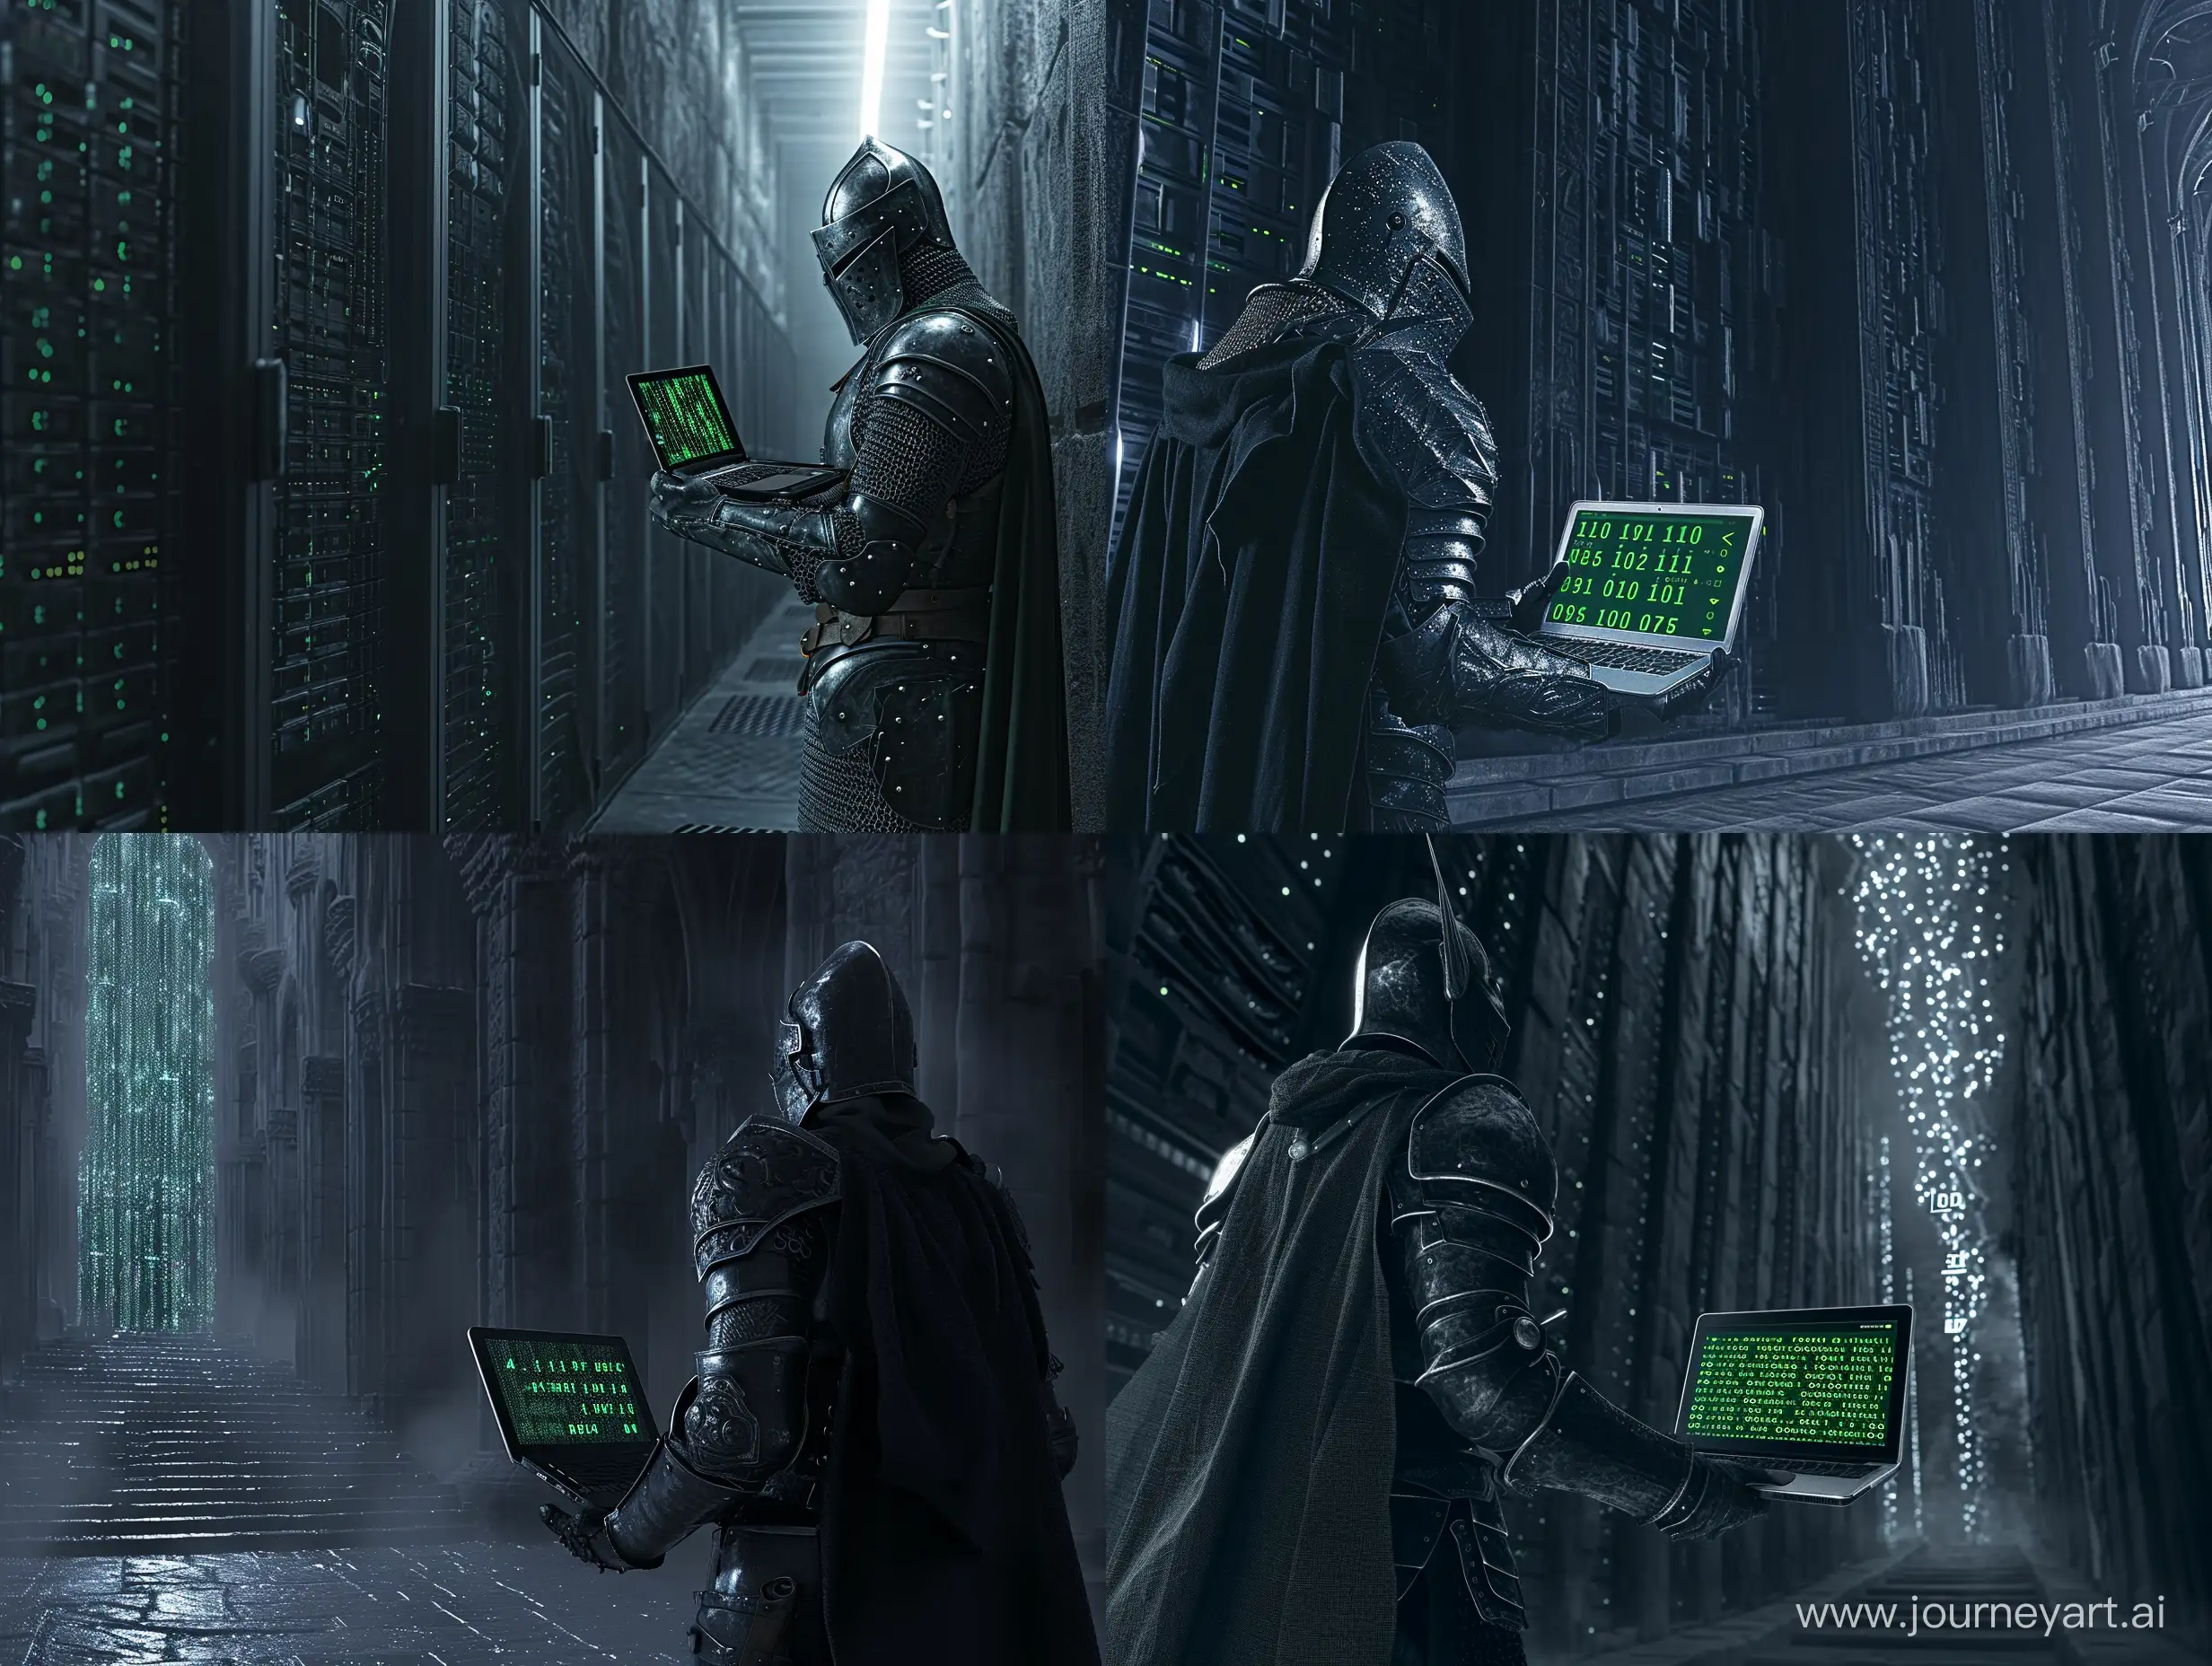 Dark-Medieval-Knight-Confronting-Ominous-Datacenter-with-Binary-Code-Laptop